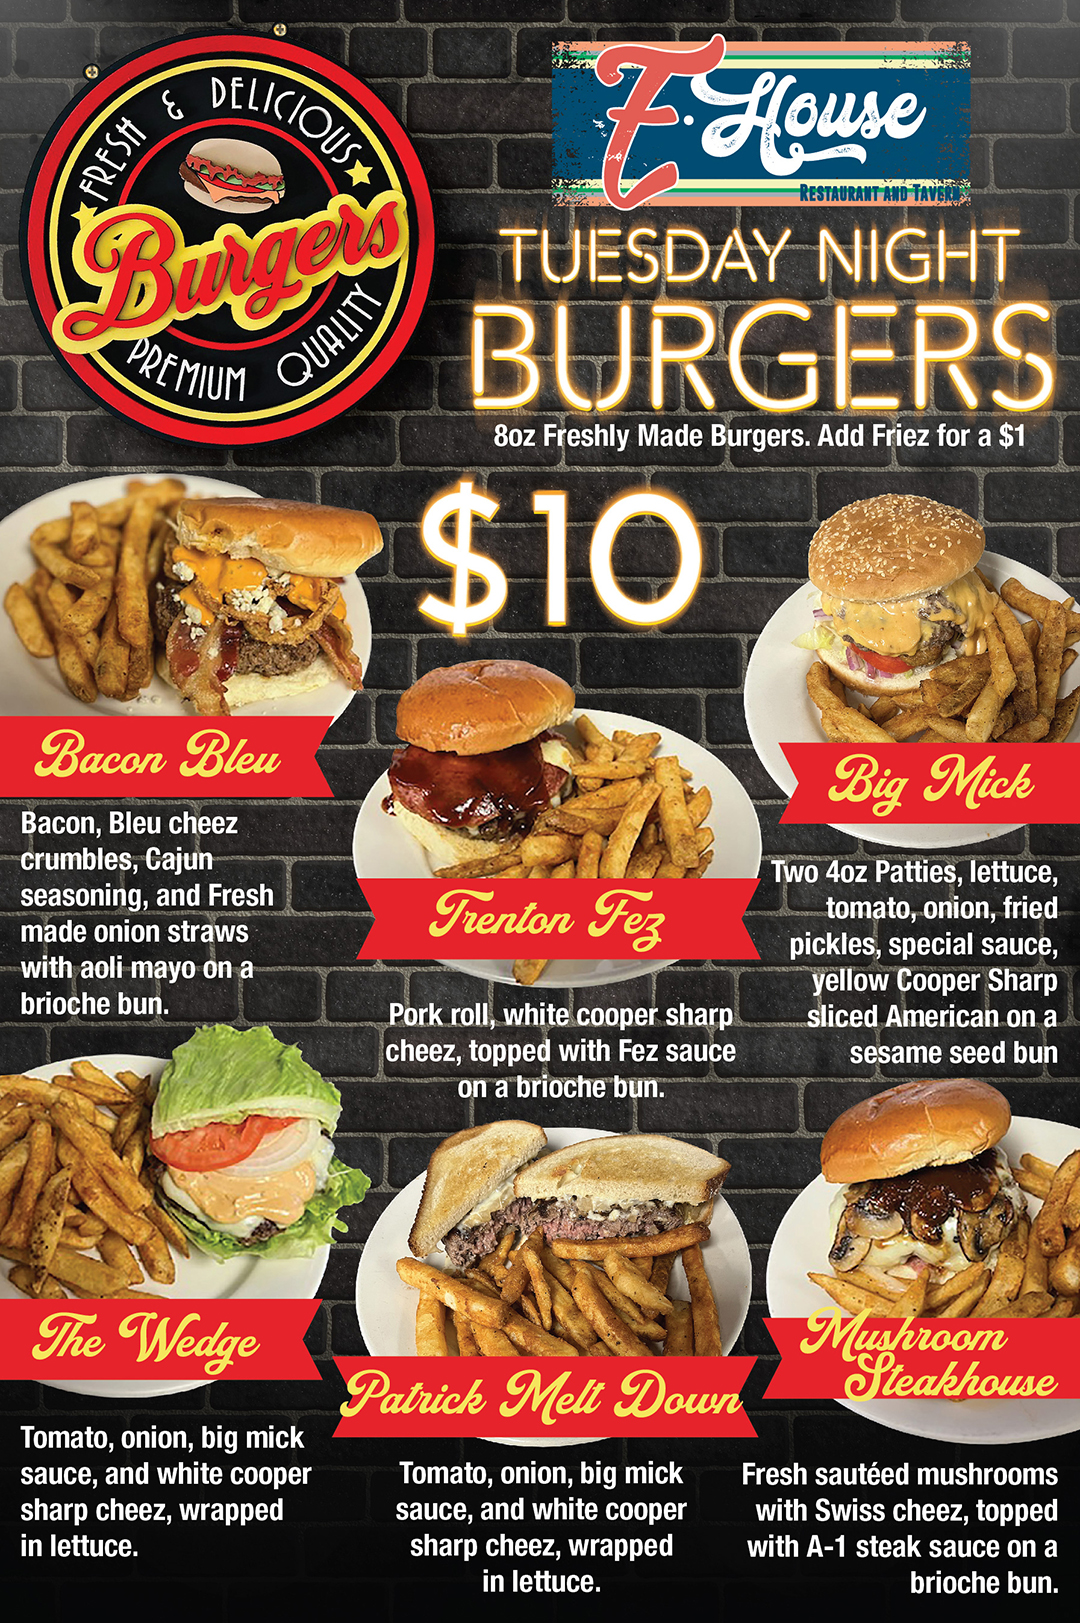 A flyer for tuesday night burgers.